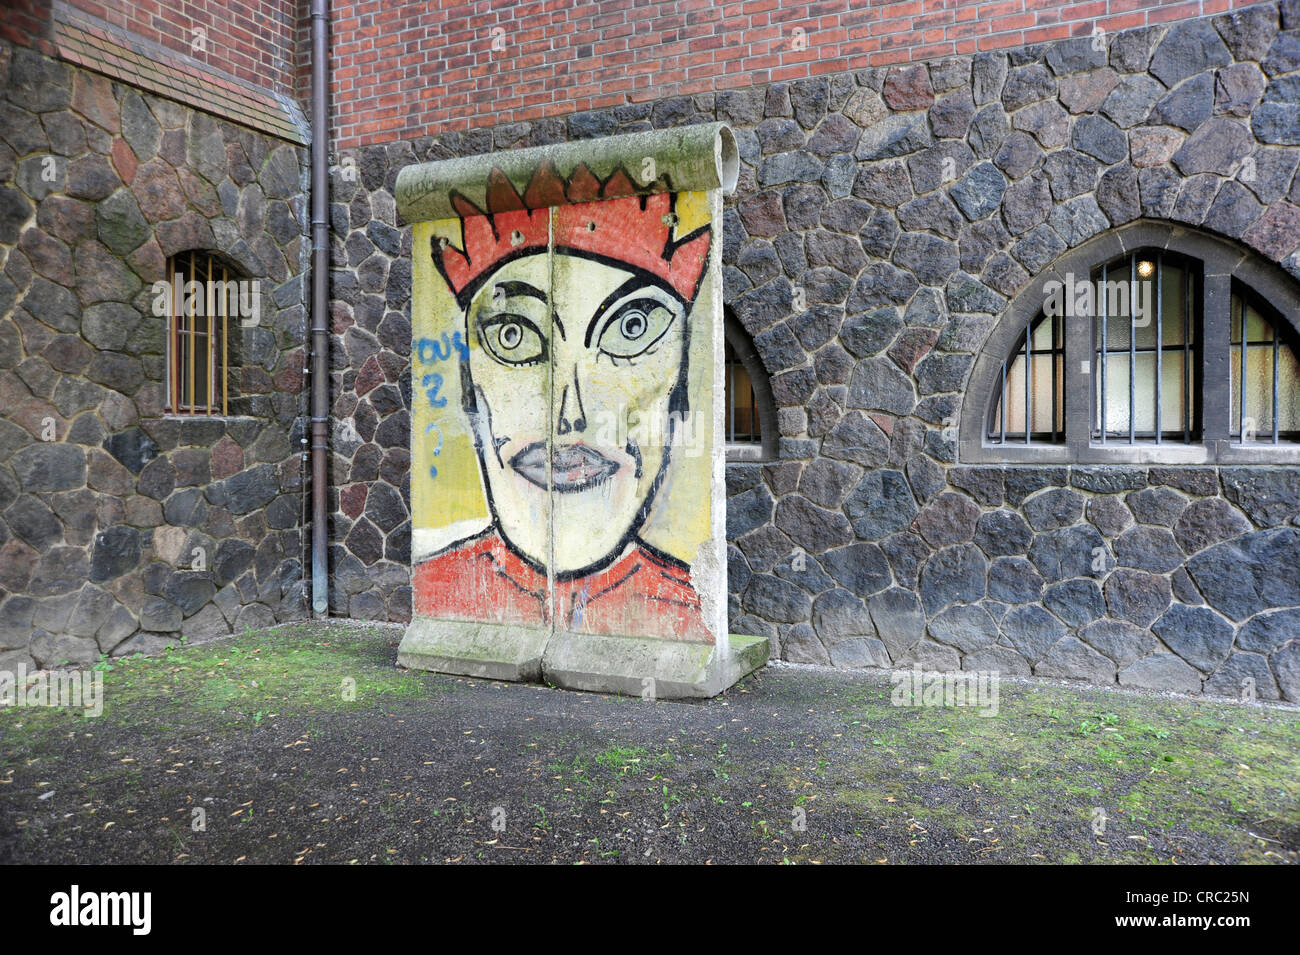 images Alamy Graffiti - art berlin stock hi-res photography mitte and